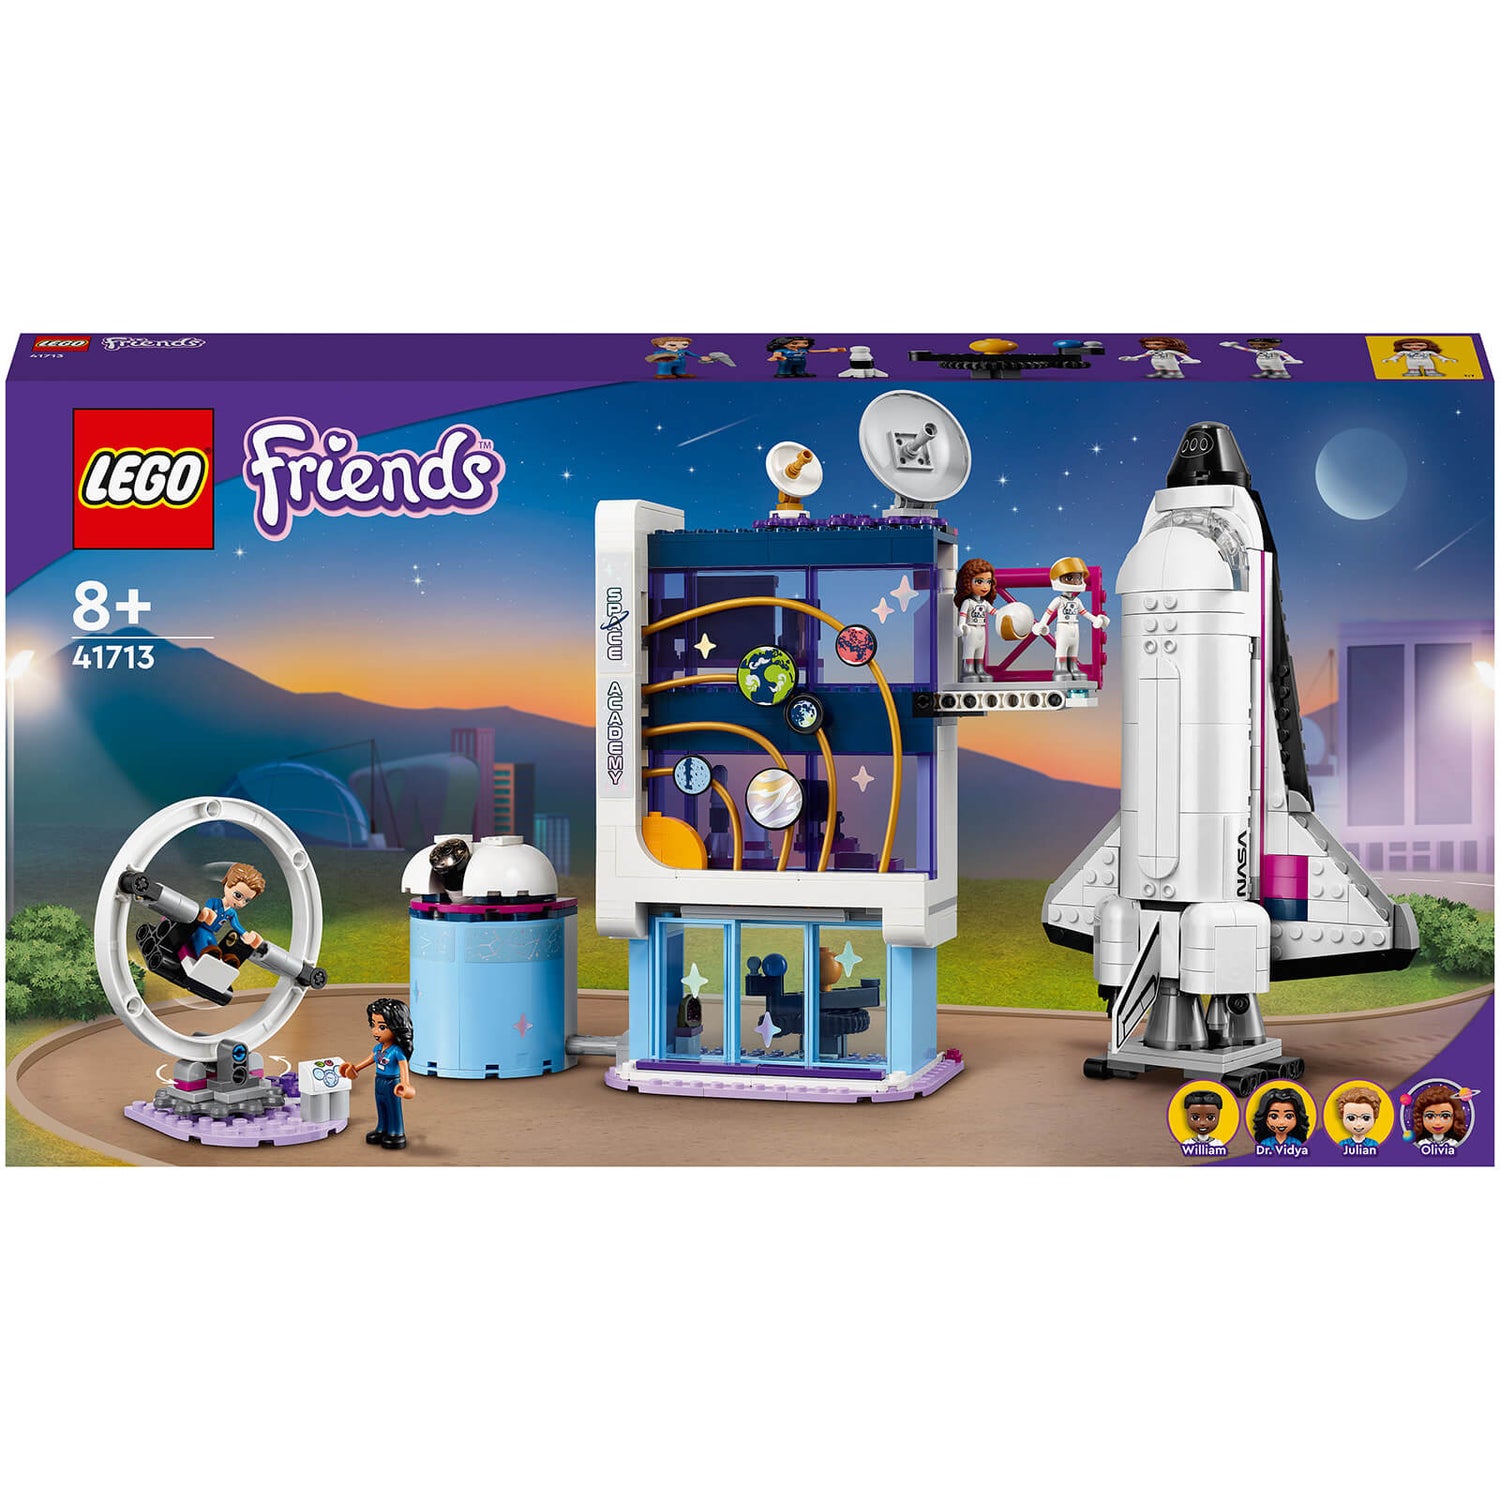 LEGO Friends: Olivia’s Space Academy Space Shuttle Toy (41713)